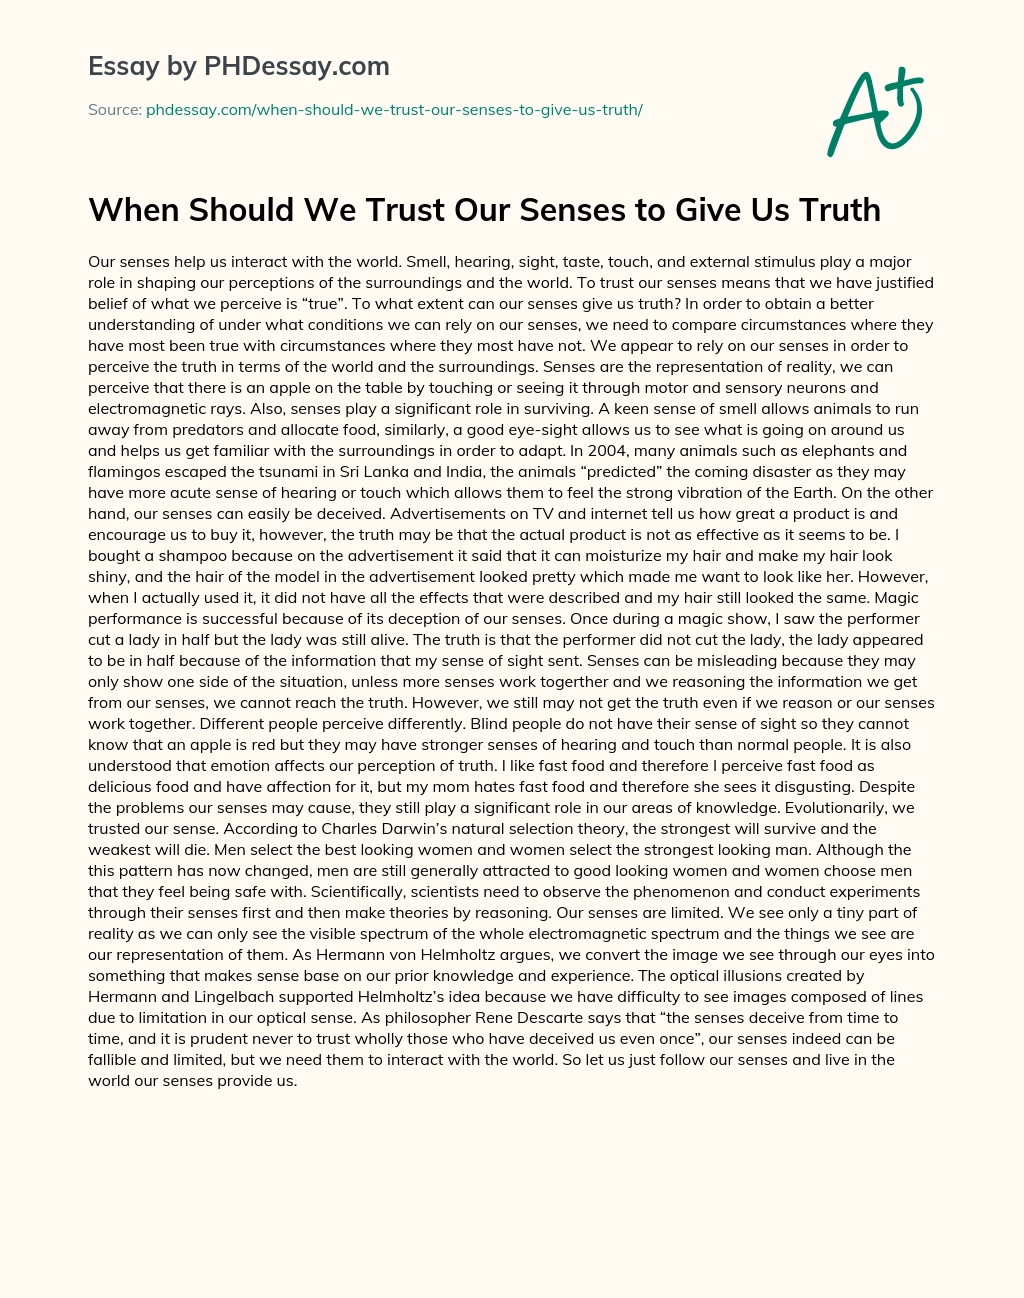 When Should We Trust Our Senses to Give Us Truth essay